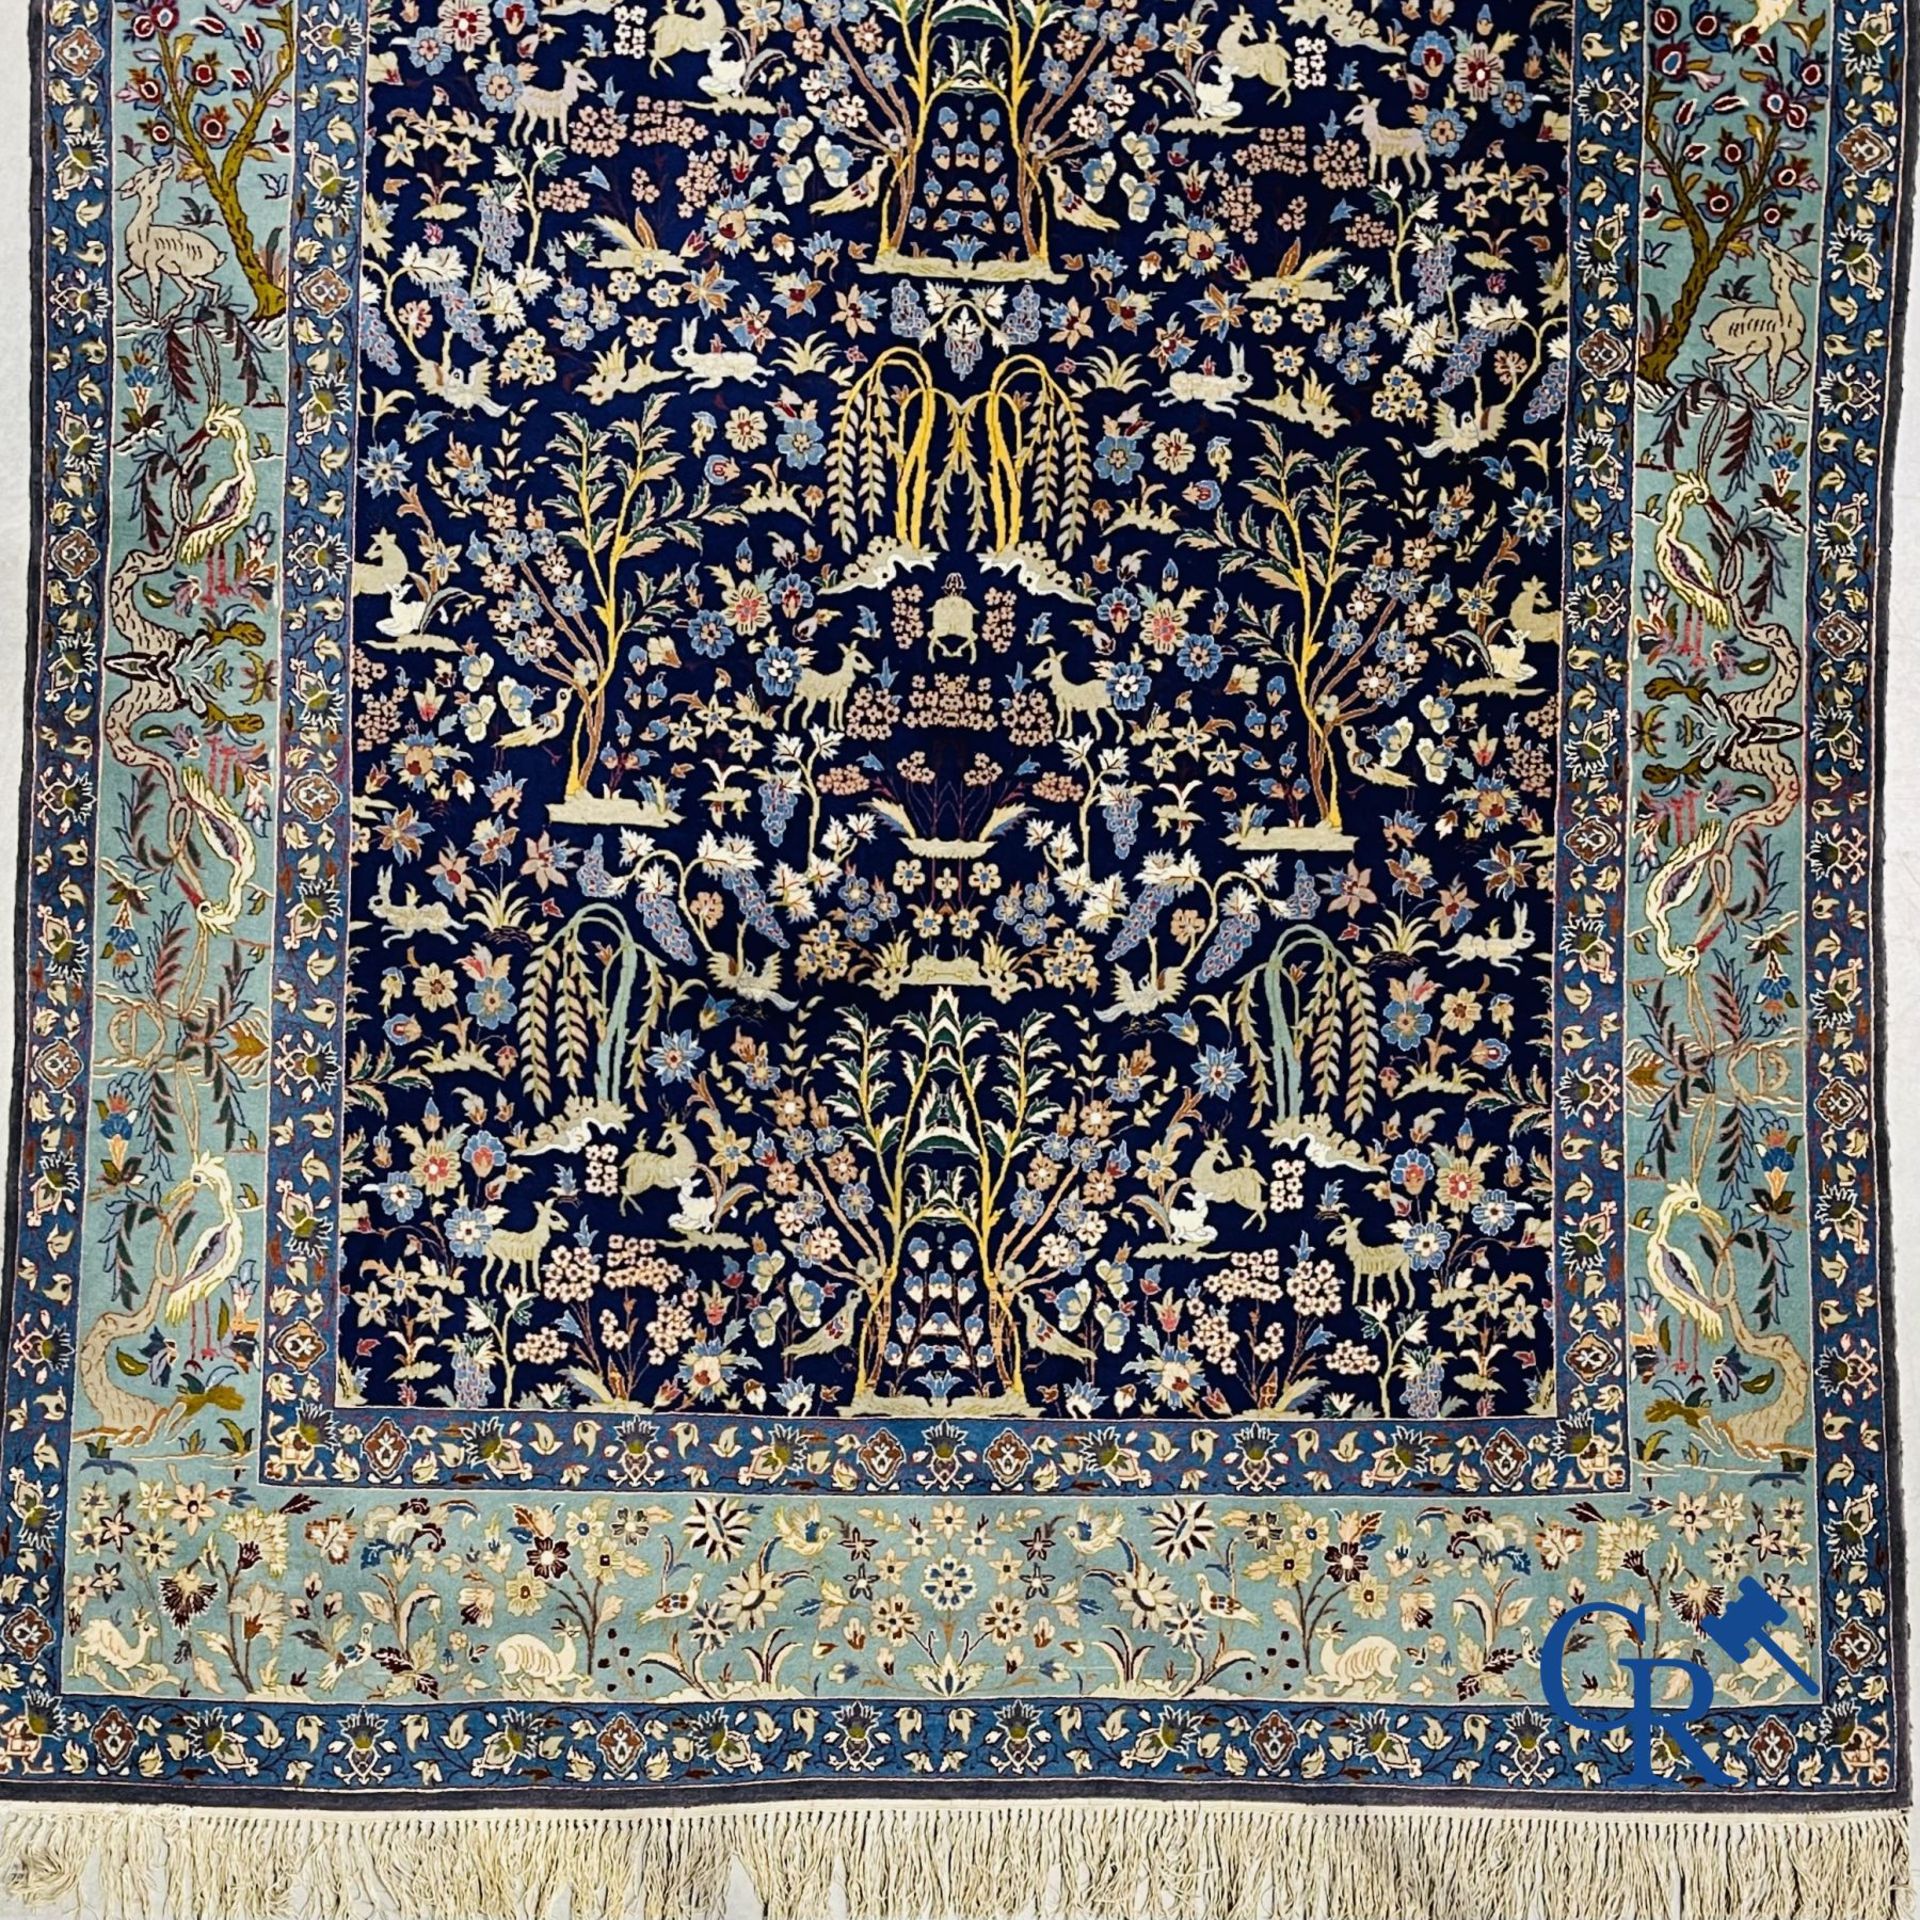 Oriental carpets: Iran. Isfahan, Persian hand-knotted carpet with a decor of animals, birds, plants 